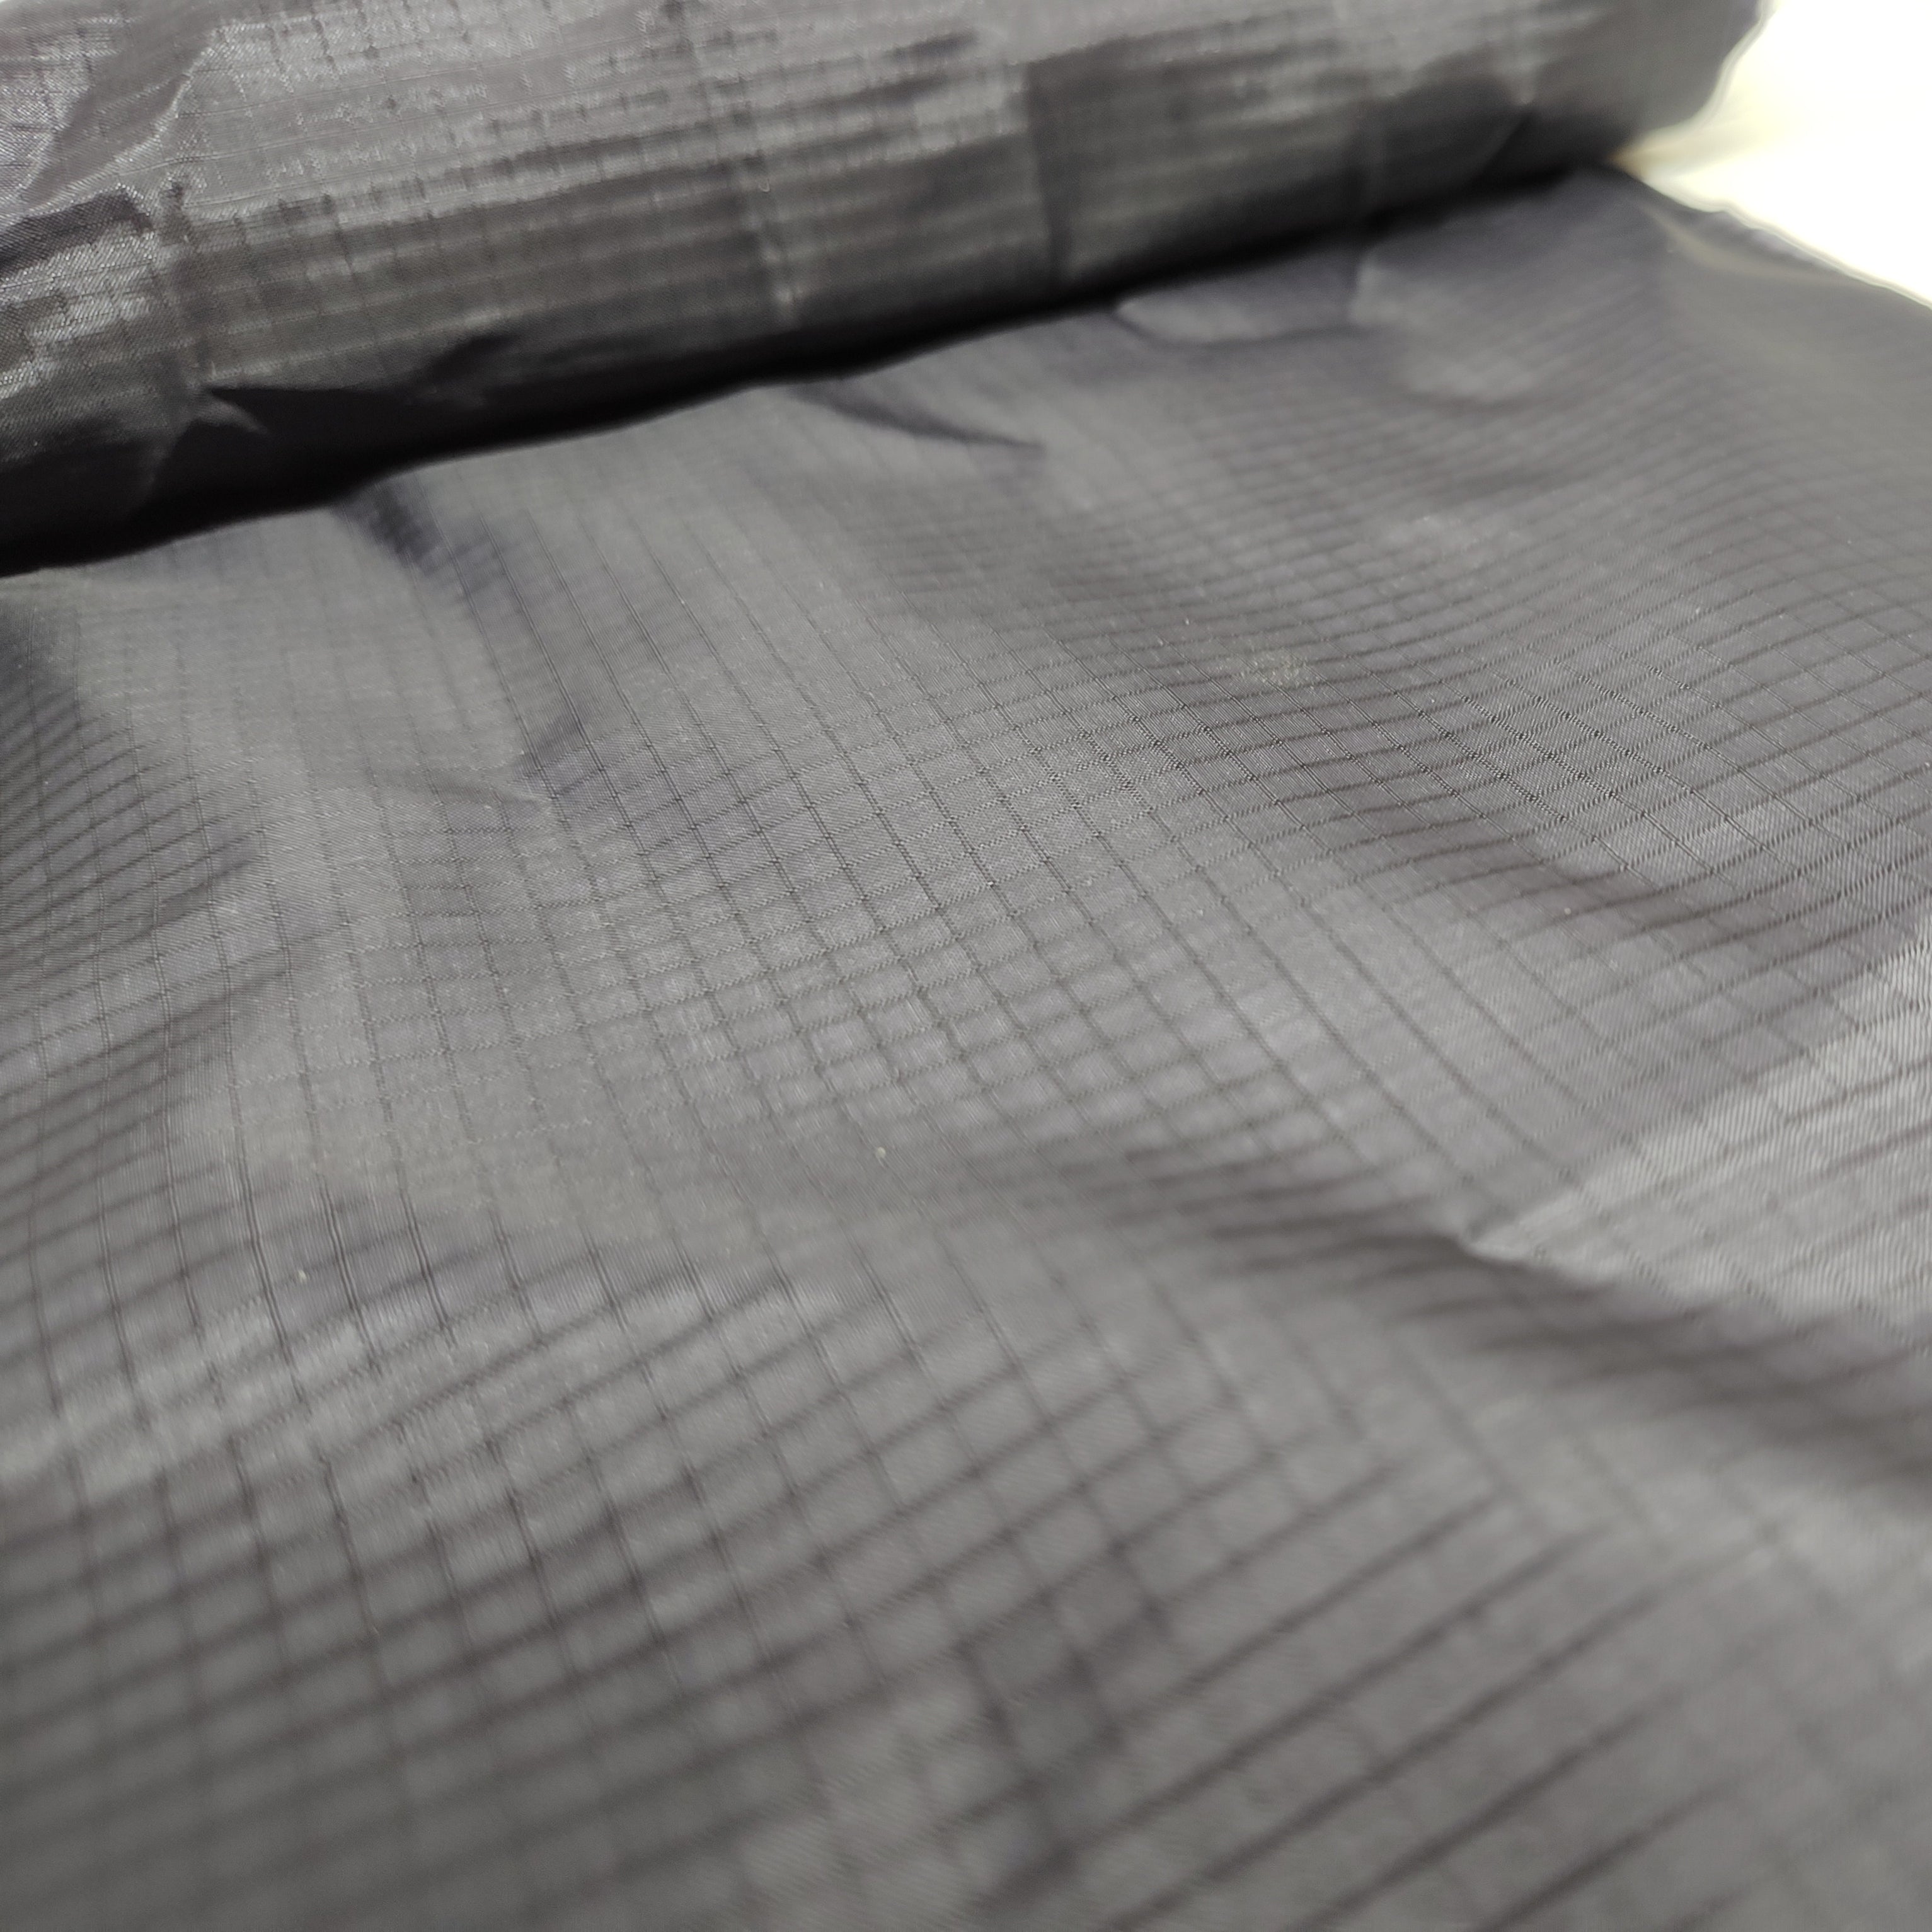 Nylon 4-Way Comfort Stretch Durable Water Repellent Ripstop Fabric, Functional Fabrics & Knitted Fabrics Manufacturer